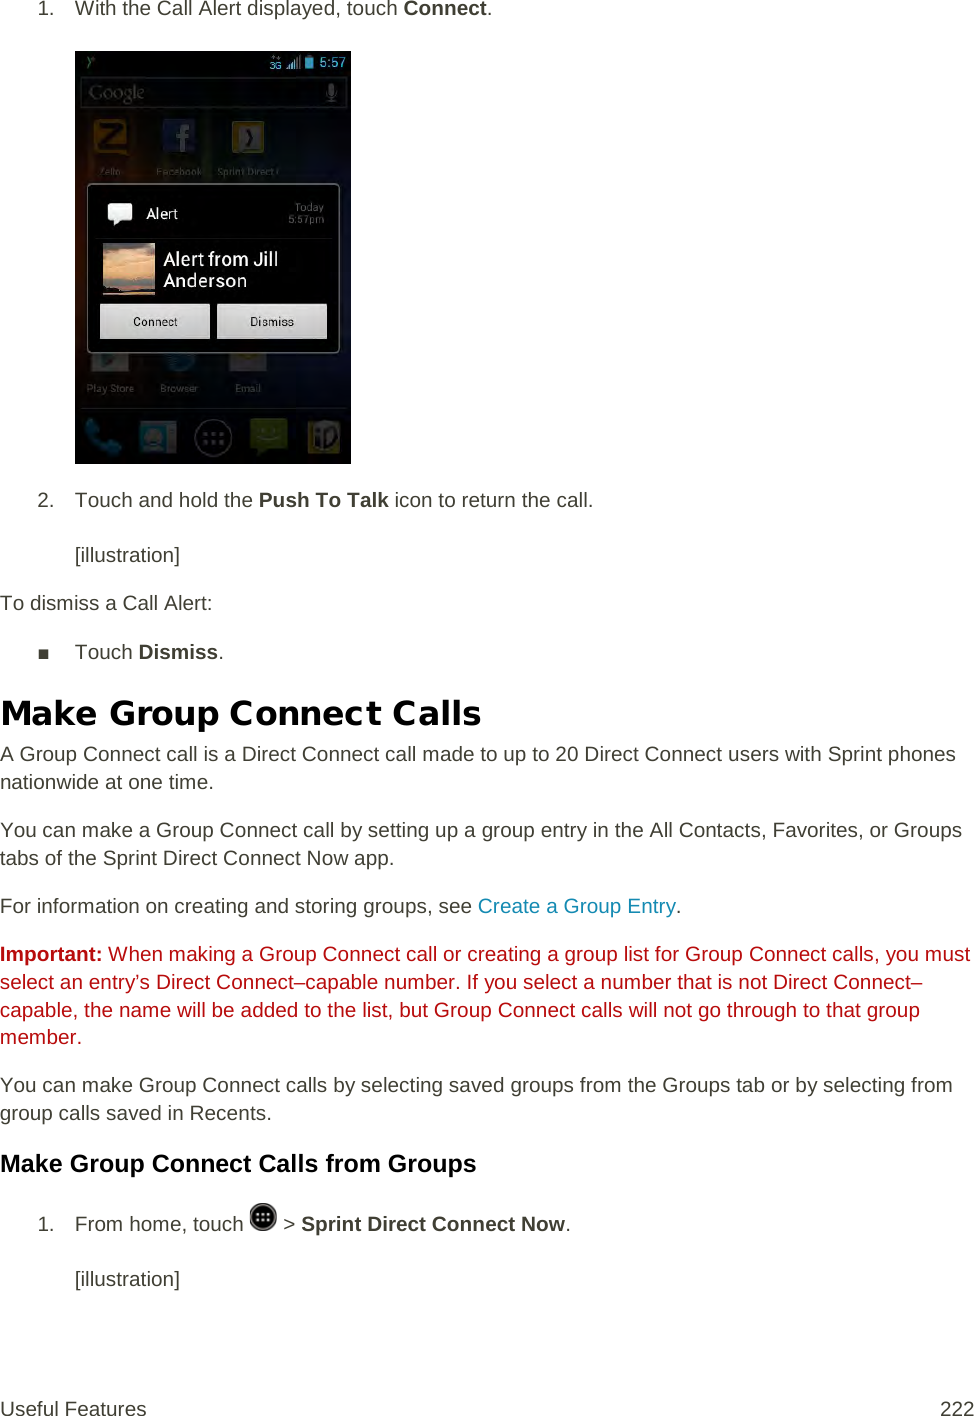 1. With the Call Alert displayed, touch Connect.    2. Touch and hold the Push To Talk icon to return the call.   [illustration] To dismiss a Call Alert: ■ Touch Dismiss. Make Group Connect Calls A Group Connect call is a Direct Connect call made to up to 20 Direct Connect users with Sprint phones nationwide at one time. You can make a Group Connect call by setting up a group entry in the All Contacts, Favorites, or Groups tabs of the Sprint Direct Connect Now app. For information on creating and storing groups, see Create a Group Entry. Important: When making a Group Connect call or creating a group list for Group Connect calls, you must select an entry’s Direct Connect–capable number. If you select a number that is not Direct Connect–capable, the name will be added to the list, but Group Connect calls will not go through to that group member. You can make Group Connect calls by selecting saved groups from the Groups tab or by selecting from group calls saved in Recents. Make Group Connect Calls from Groups 1.  From home, touch   &gt; Sprint Direct Connect Now.   [illustration] Useful Features 222   